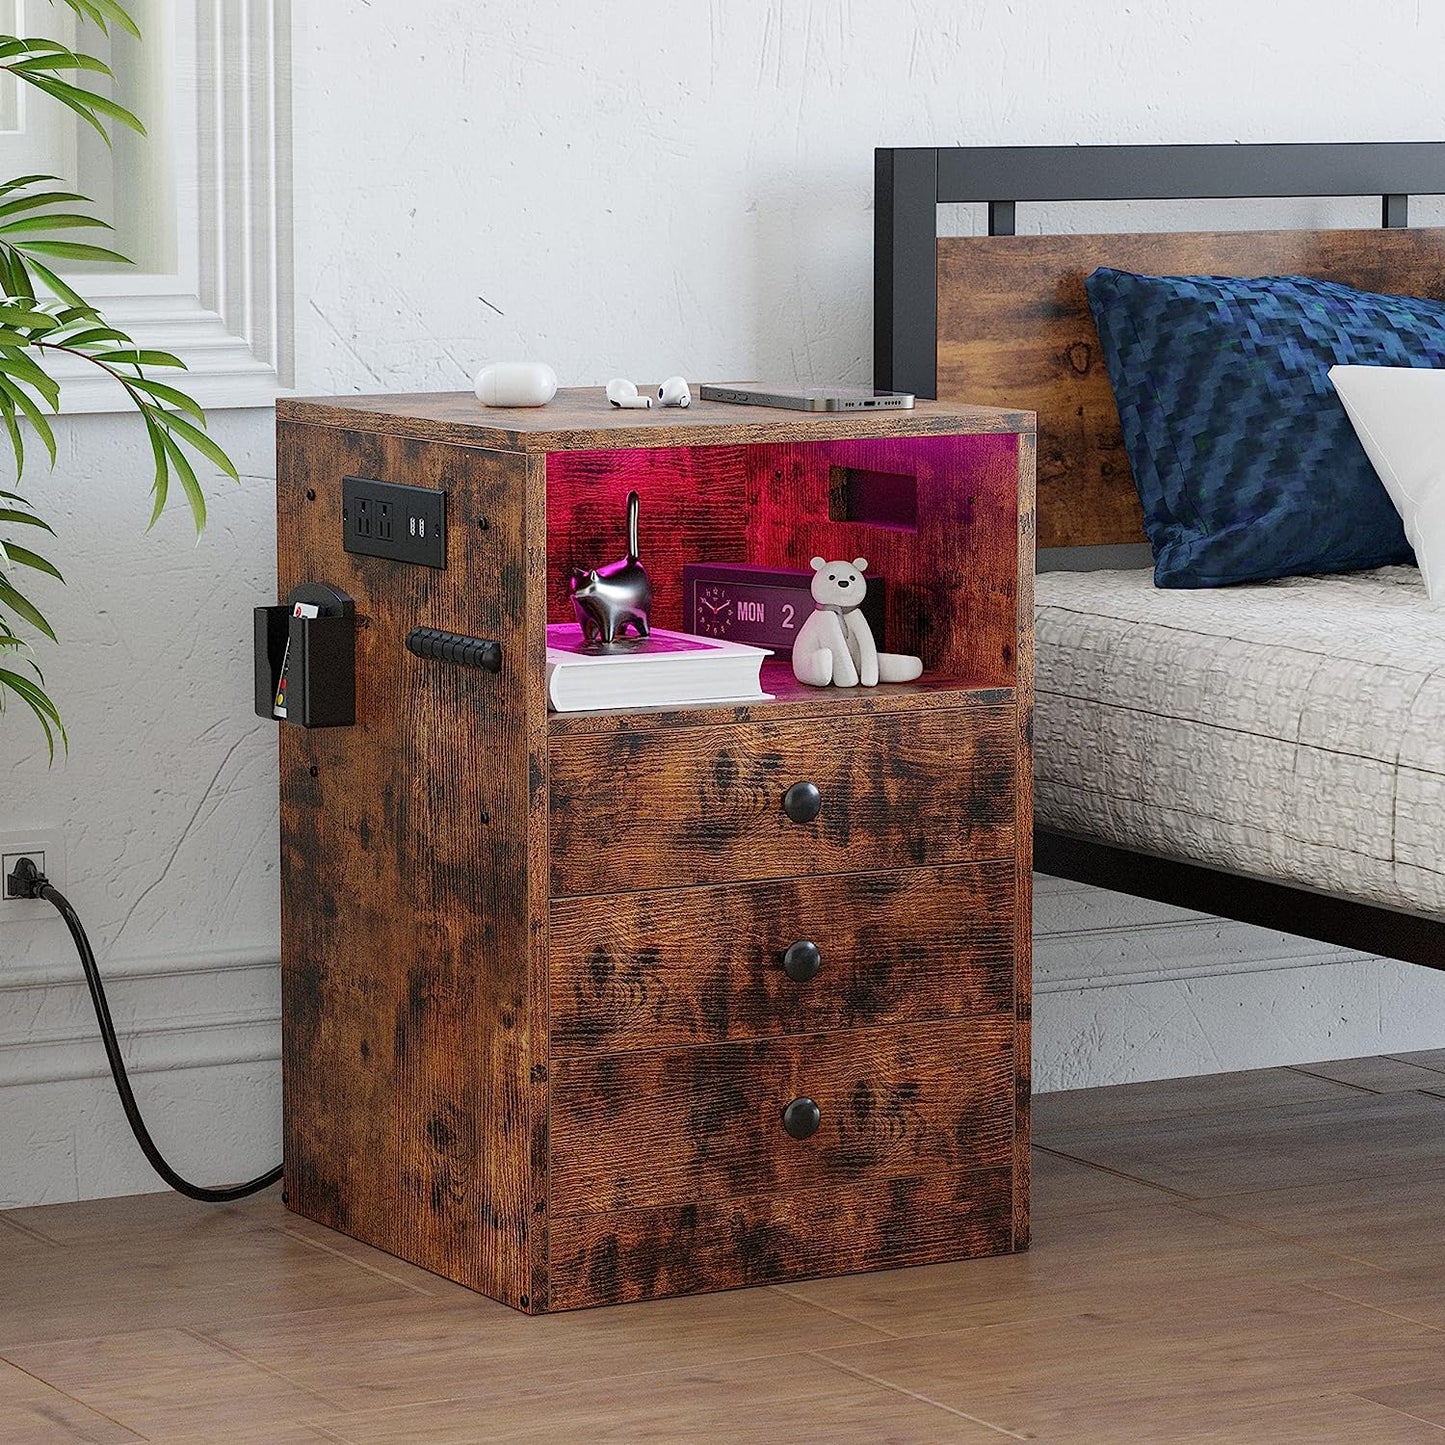 LIKIMIO Large Nightstand with LED Lights Vintage Brown